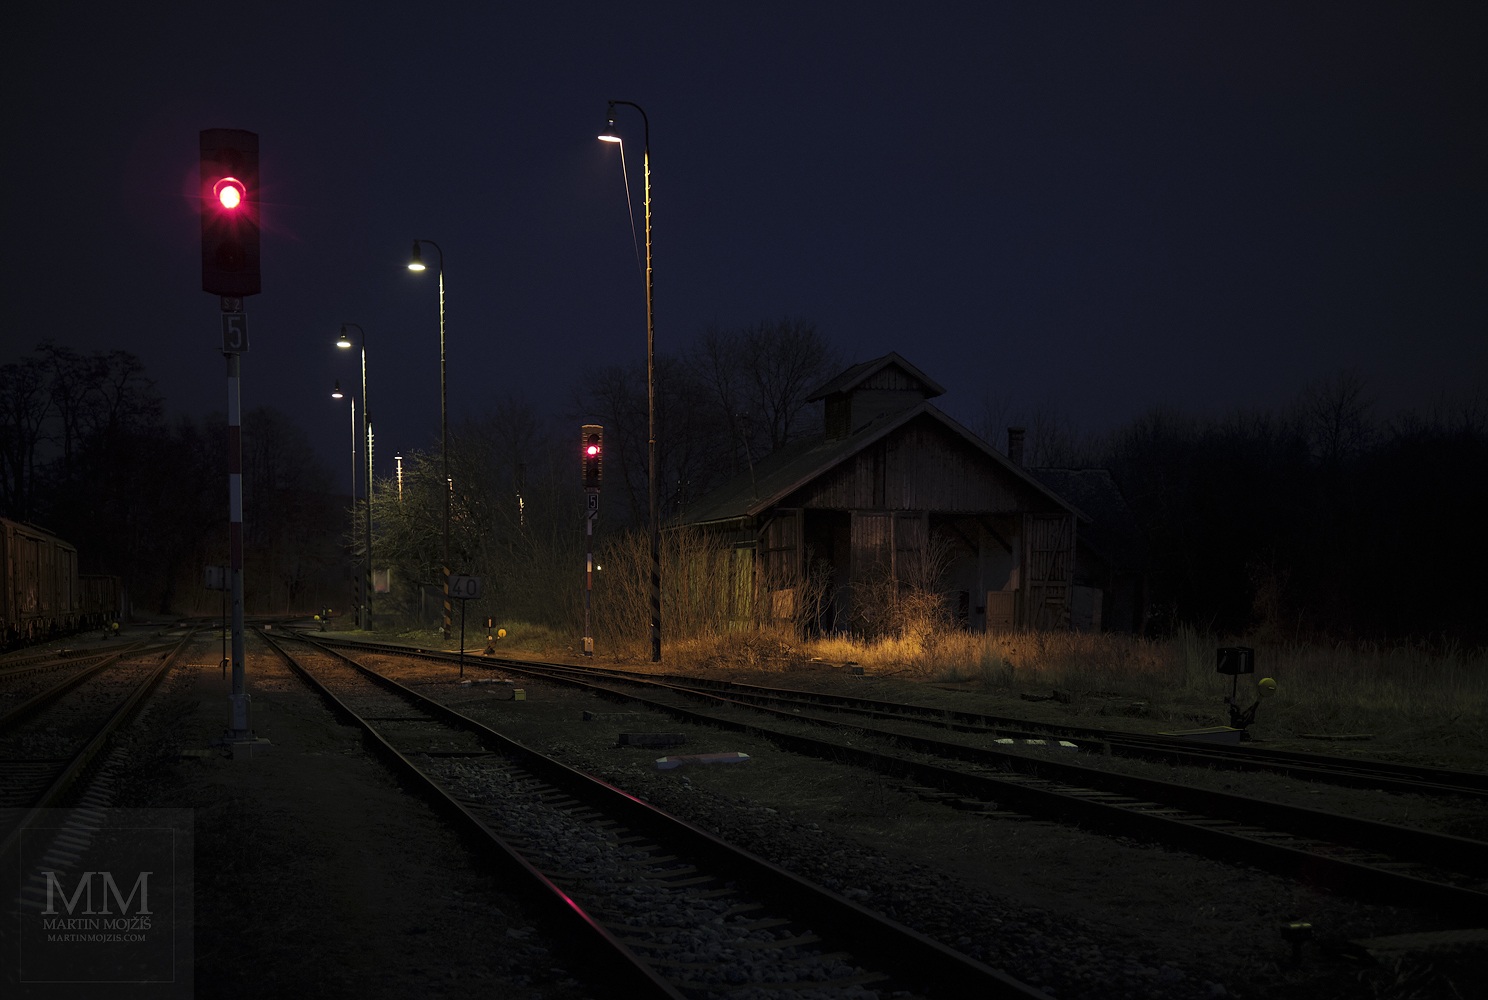 Fine Art large format photograph of the early evening railway station. Martin Mojzis.